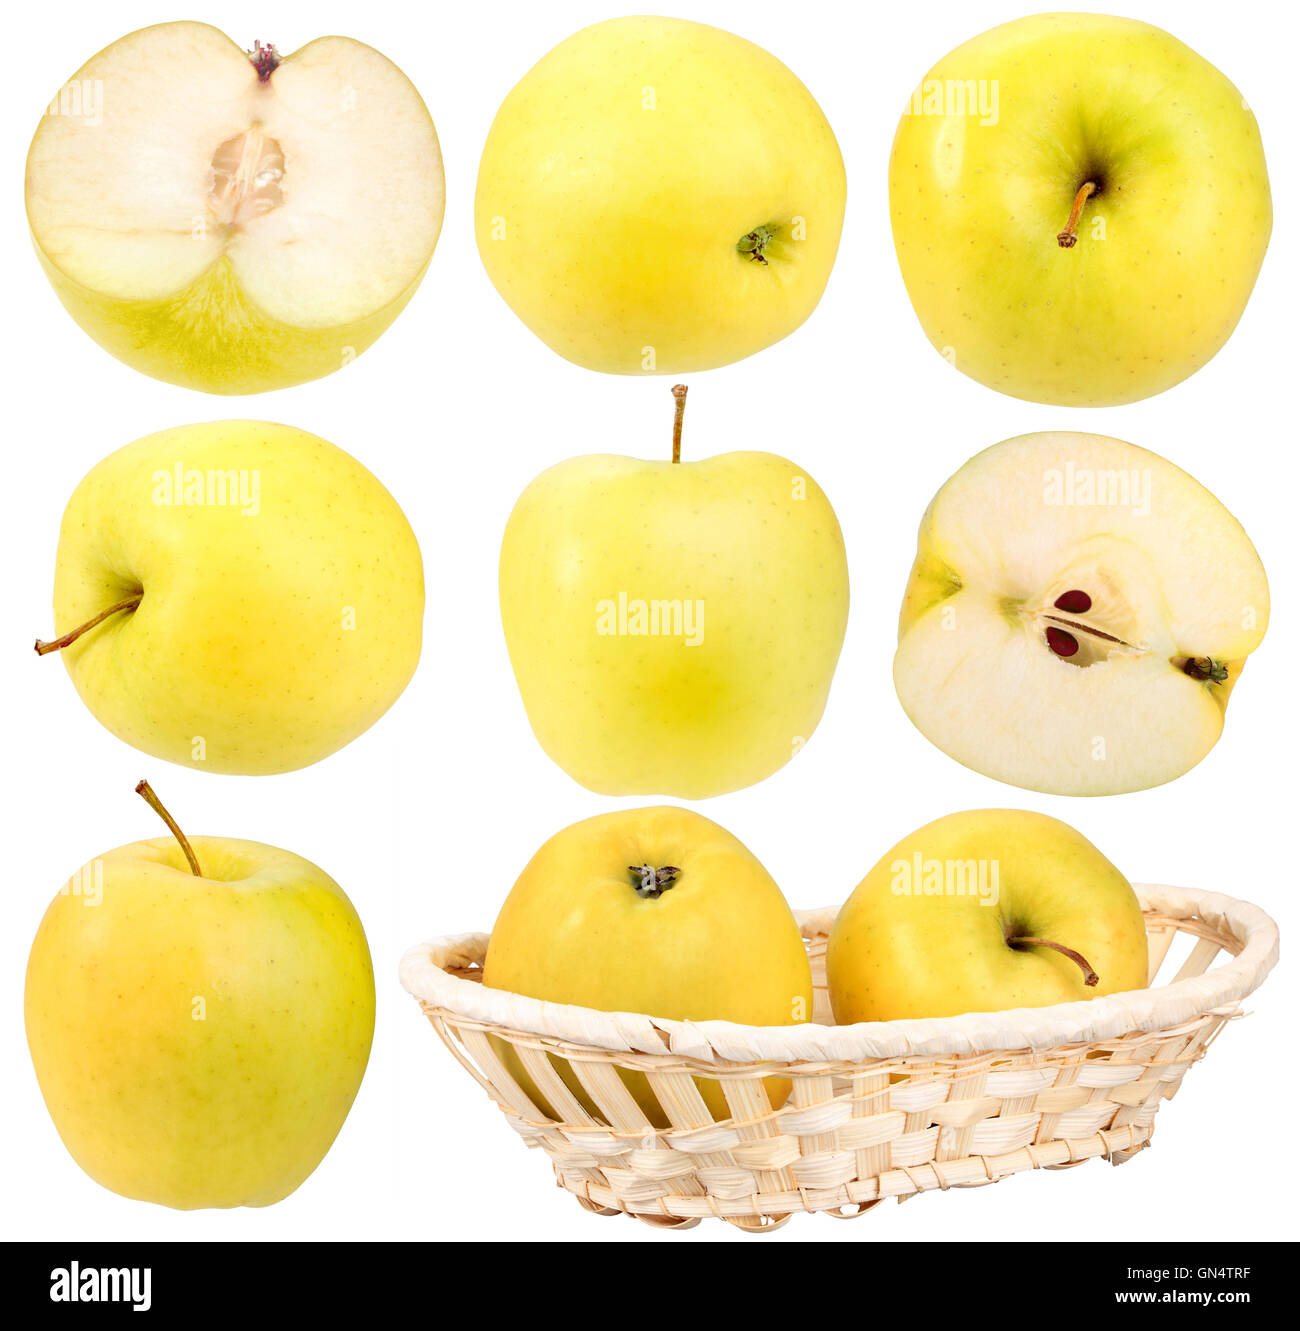 Abstract set of fresh yellow apples Stock Photo